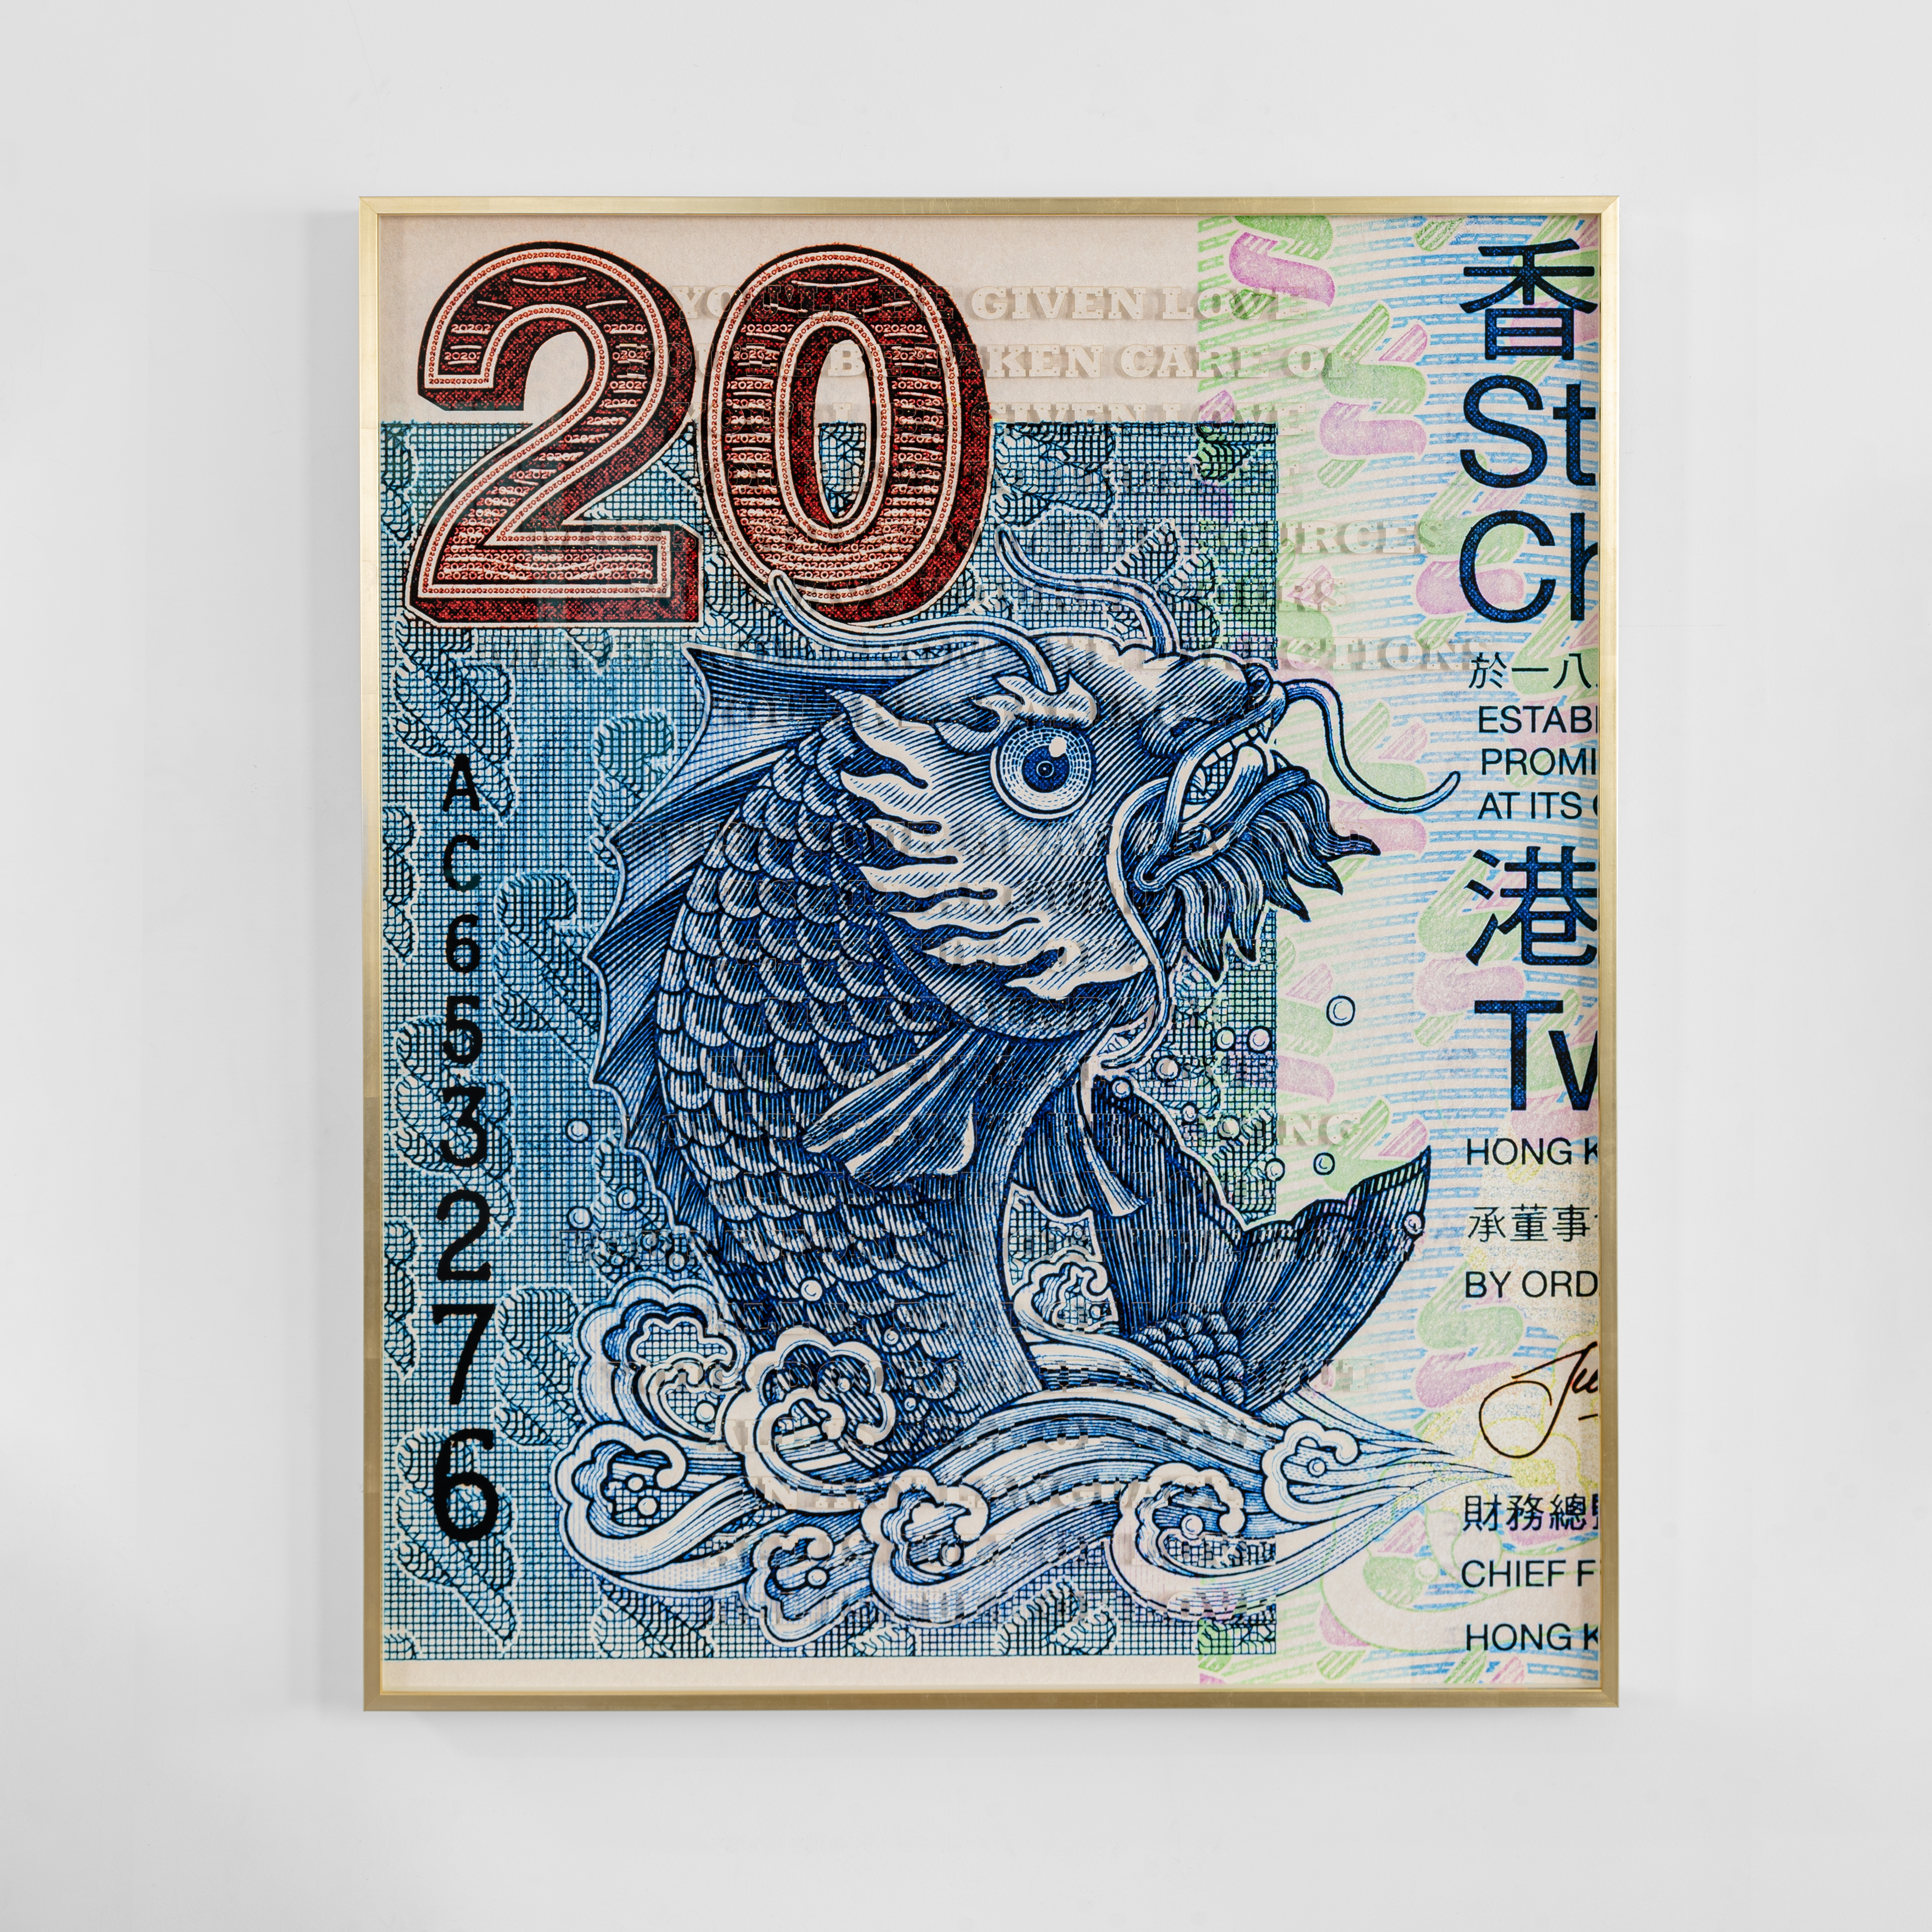 From the series Song for Time of Crisis / All is Full of Love, Hong Kong Banknote